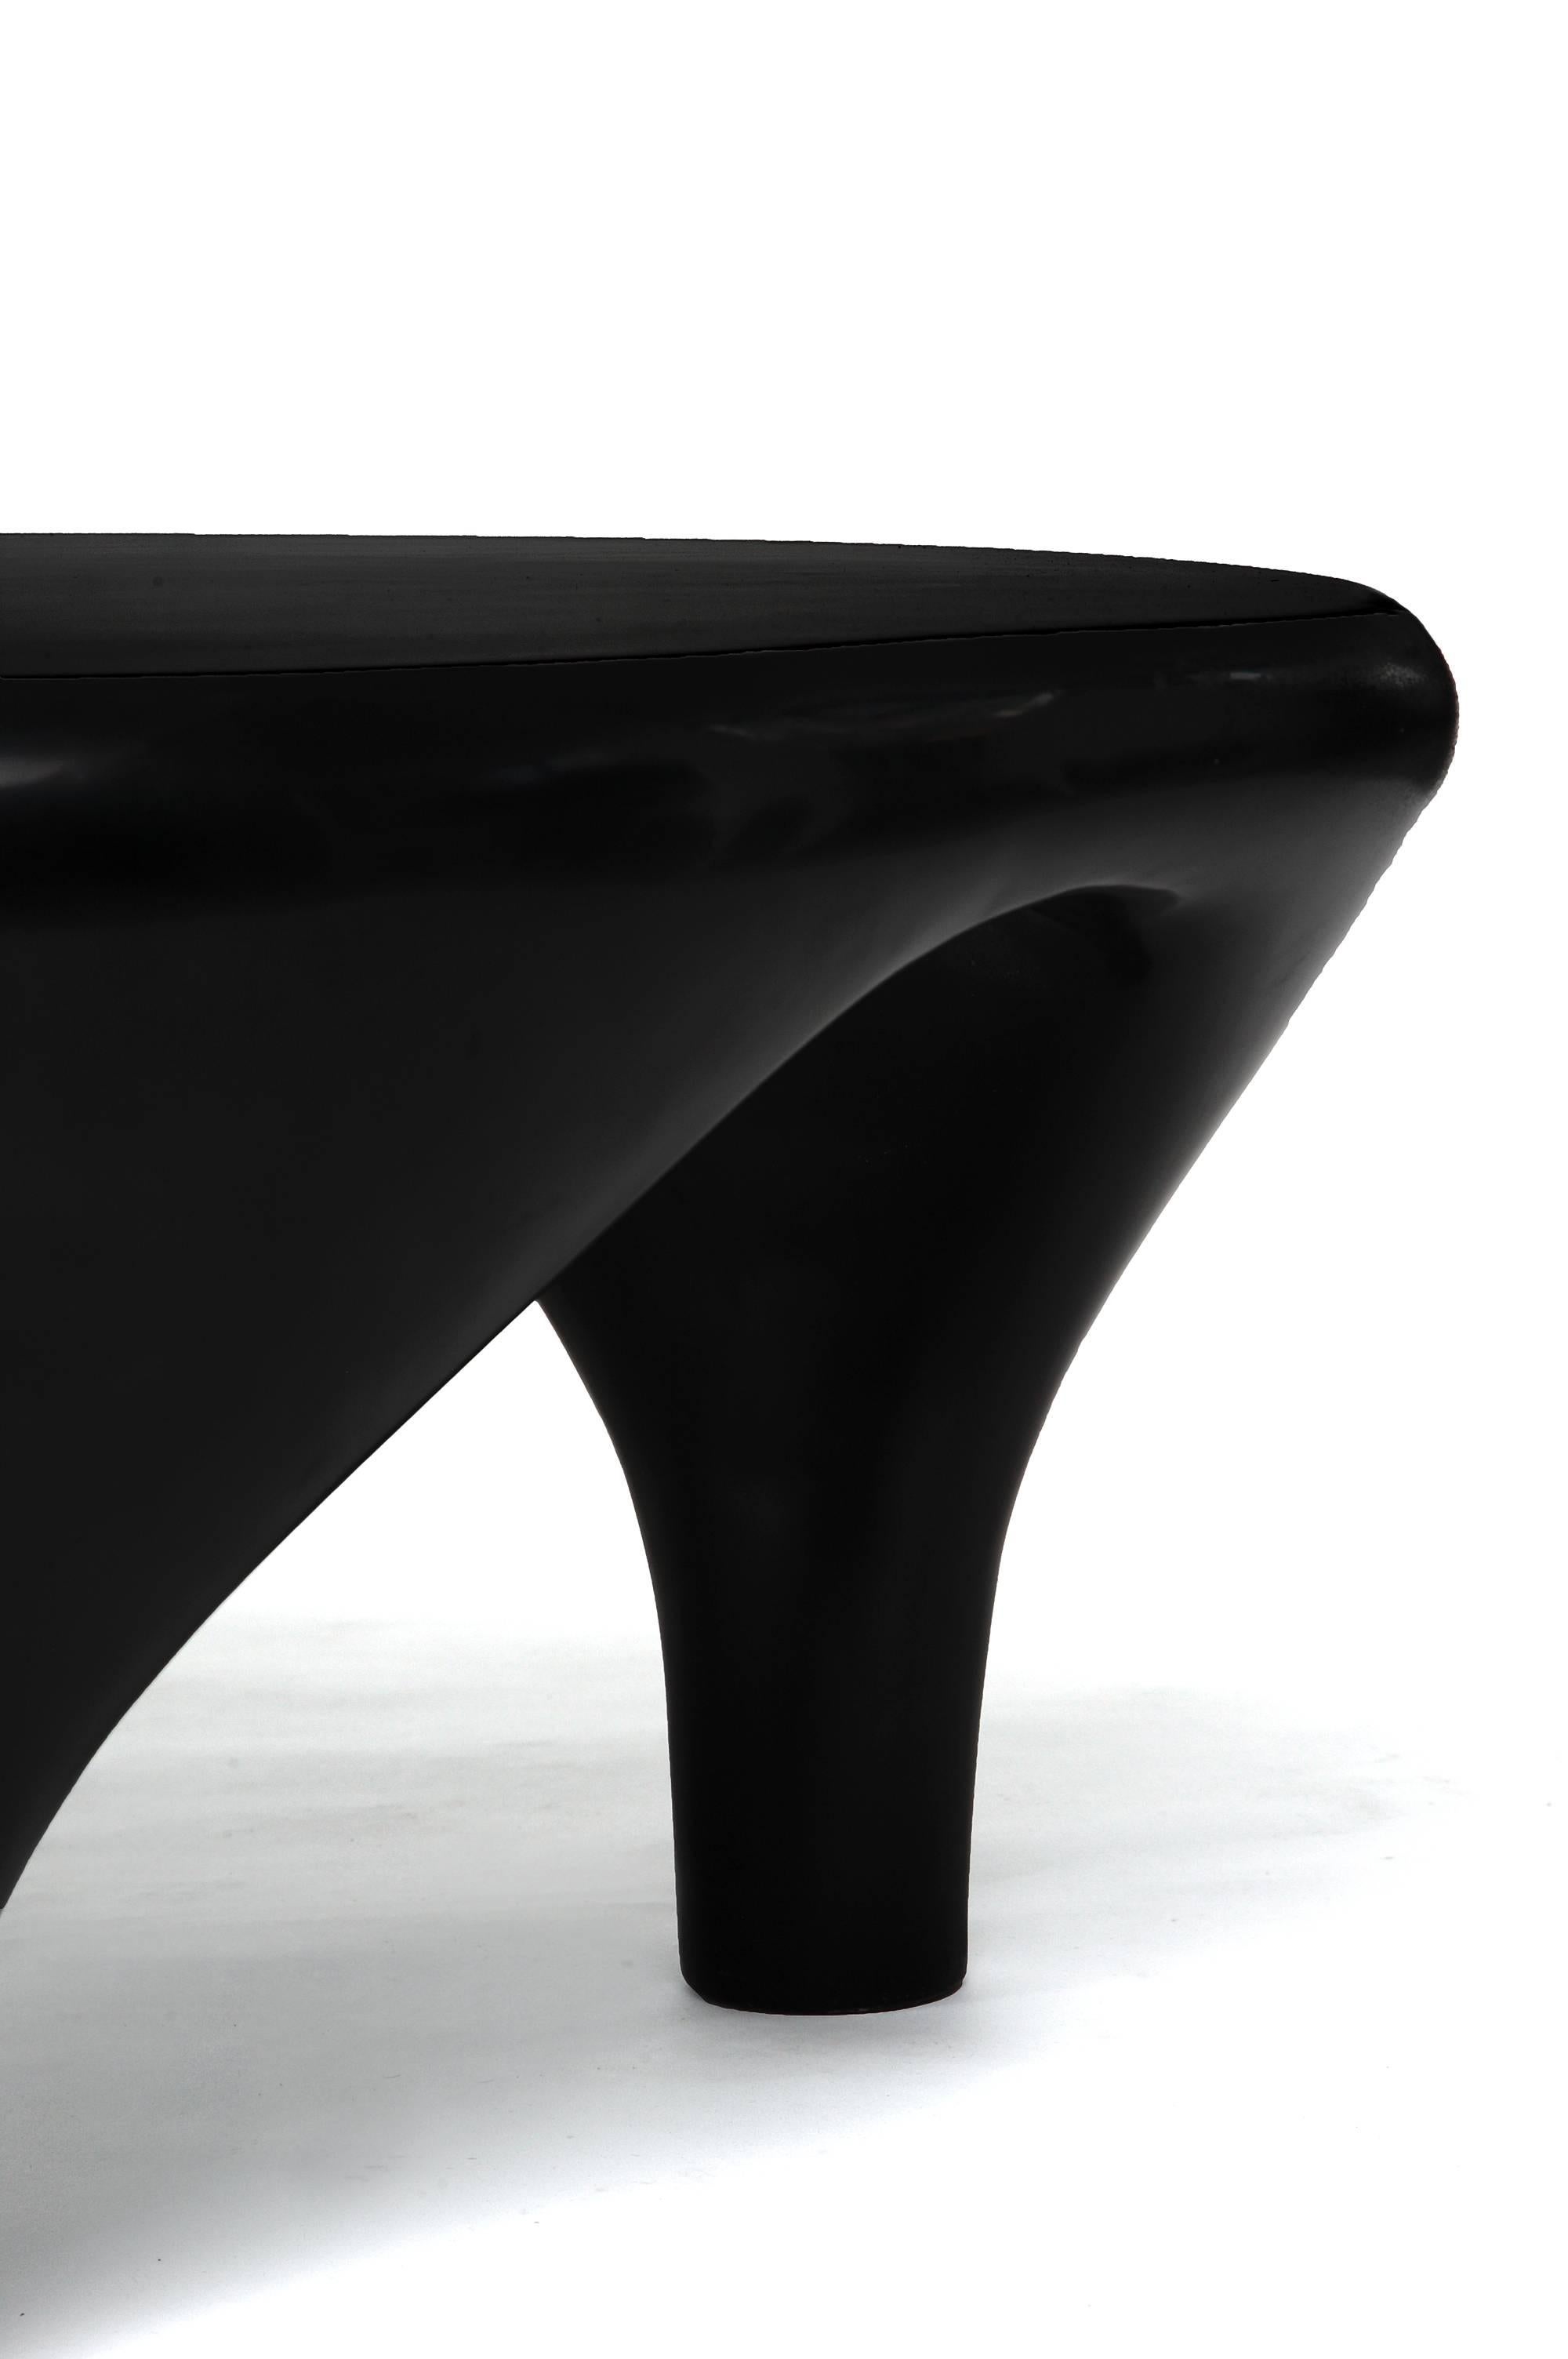 Hand Lacquer Sculptural Coffee Table by Jacques Jarrige, 2015 In Excellent Condition For Sale In New York, NY